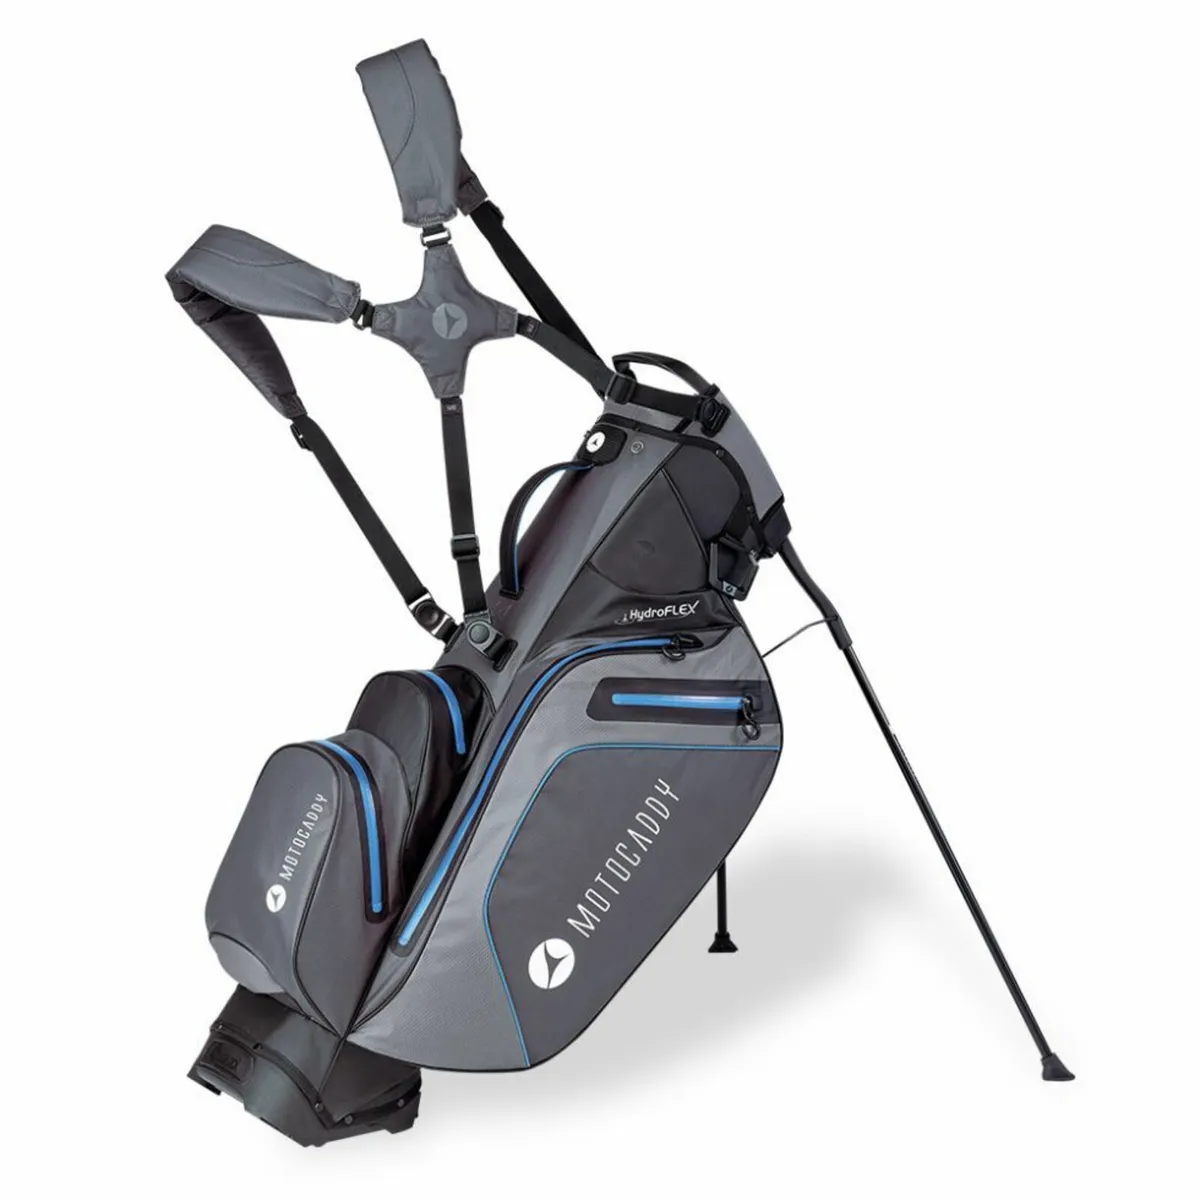 New Motocaddy Hydroflex bags limited numbers - Image 1